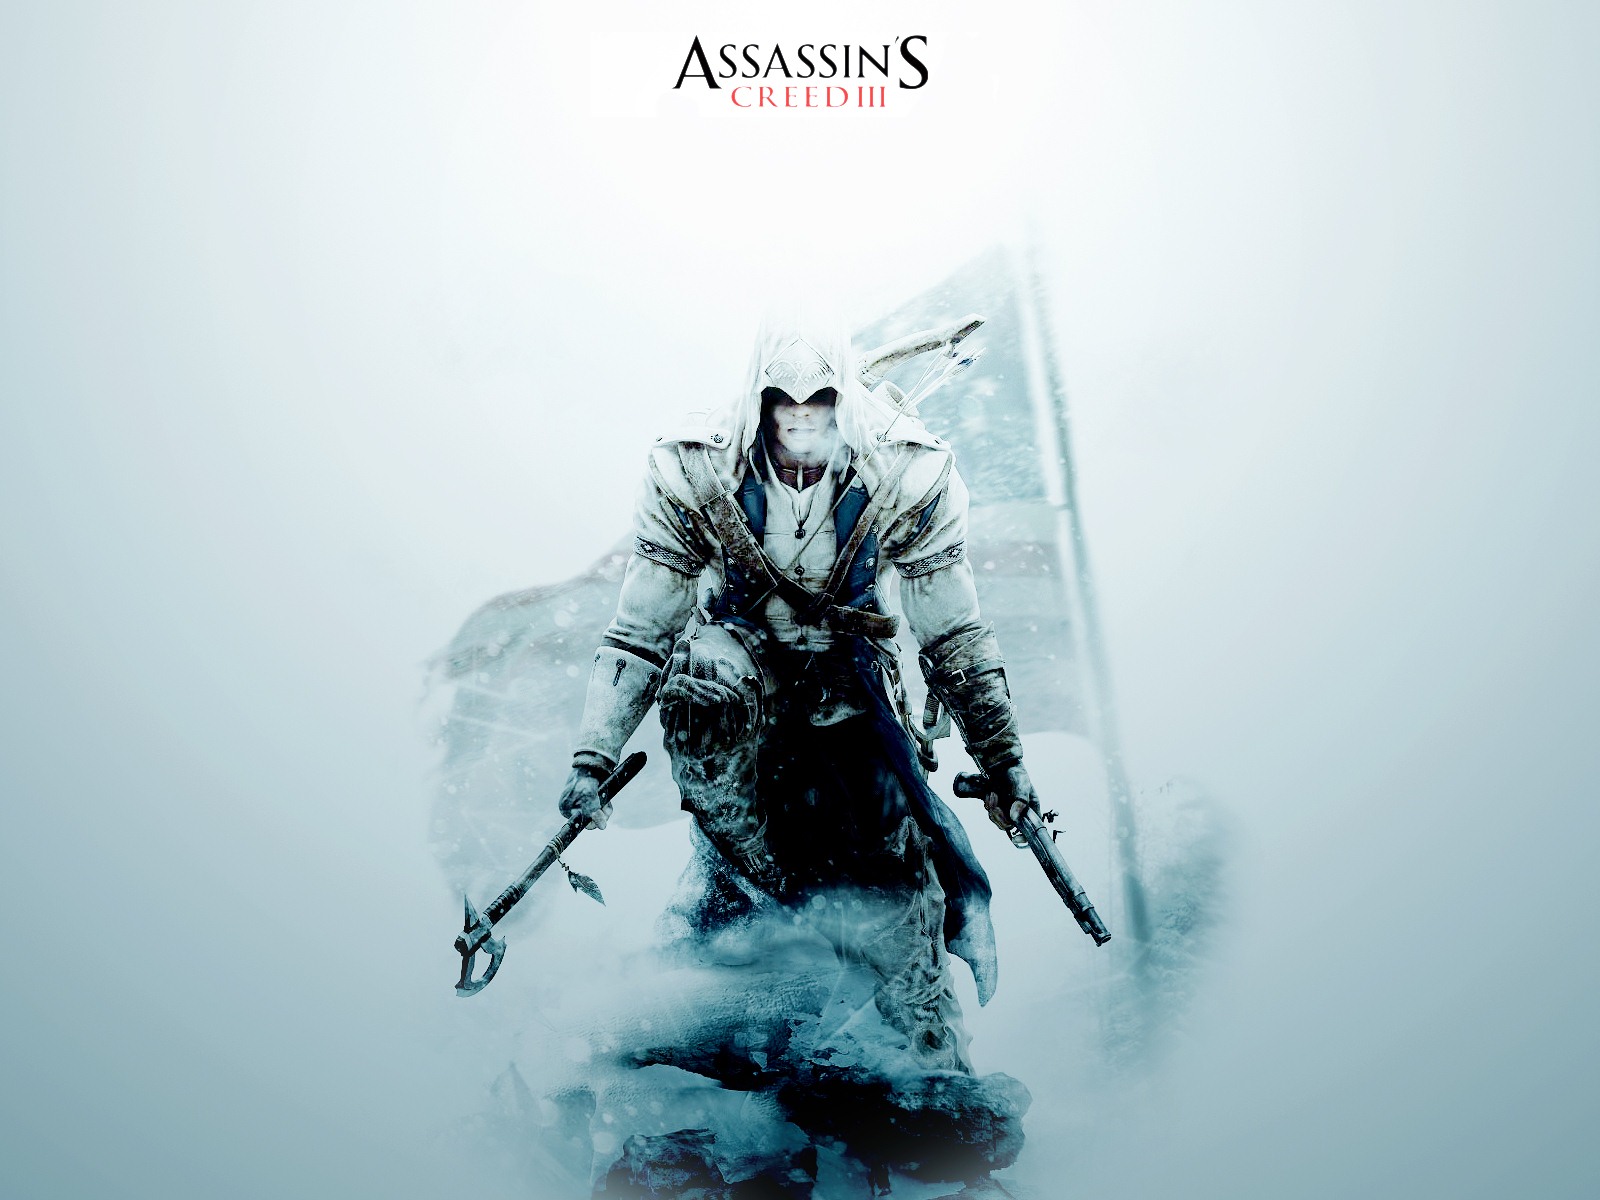 Assassin's Creed 3 HD wallpapers #11 - 1600x1200